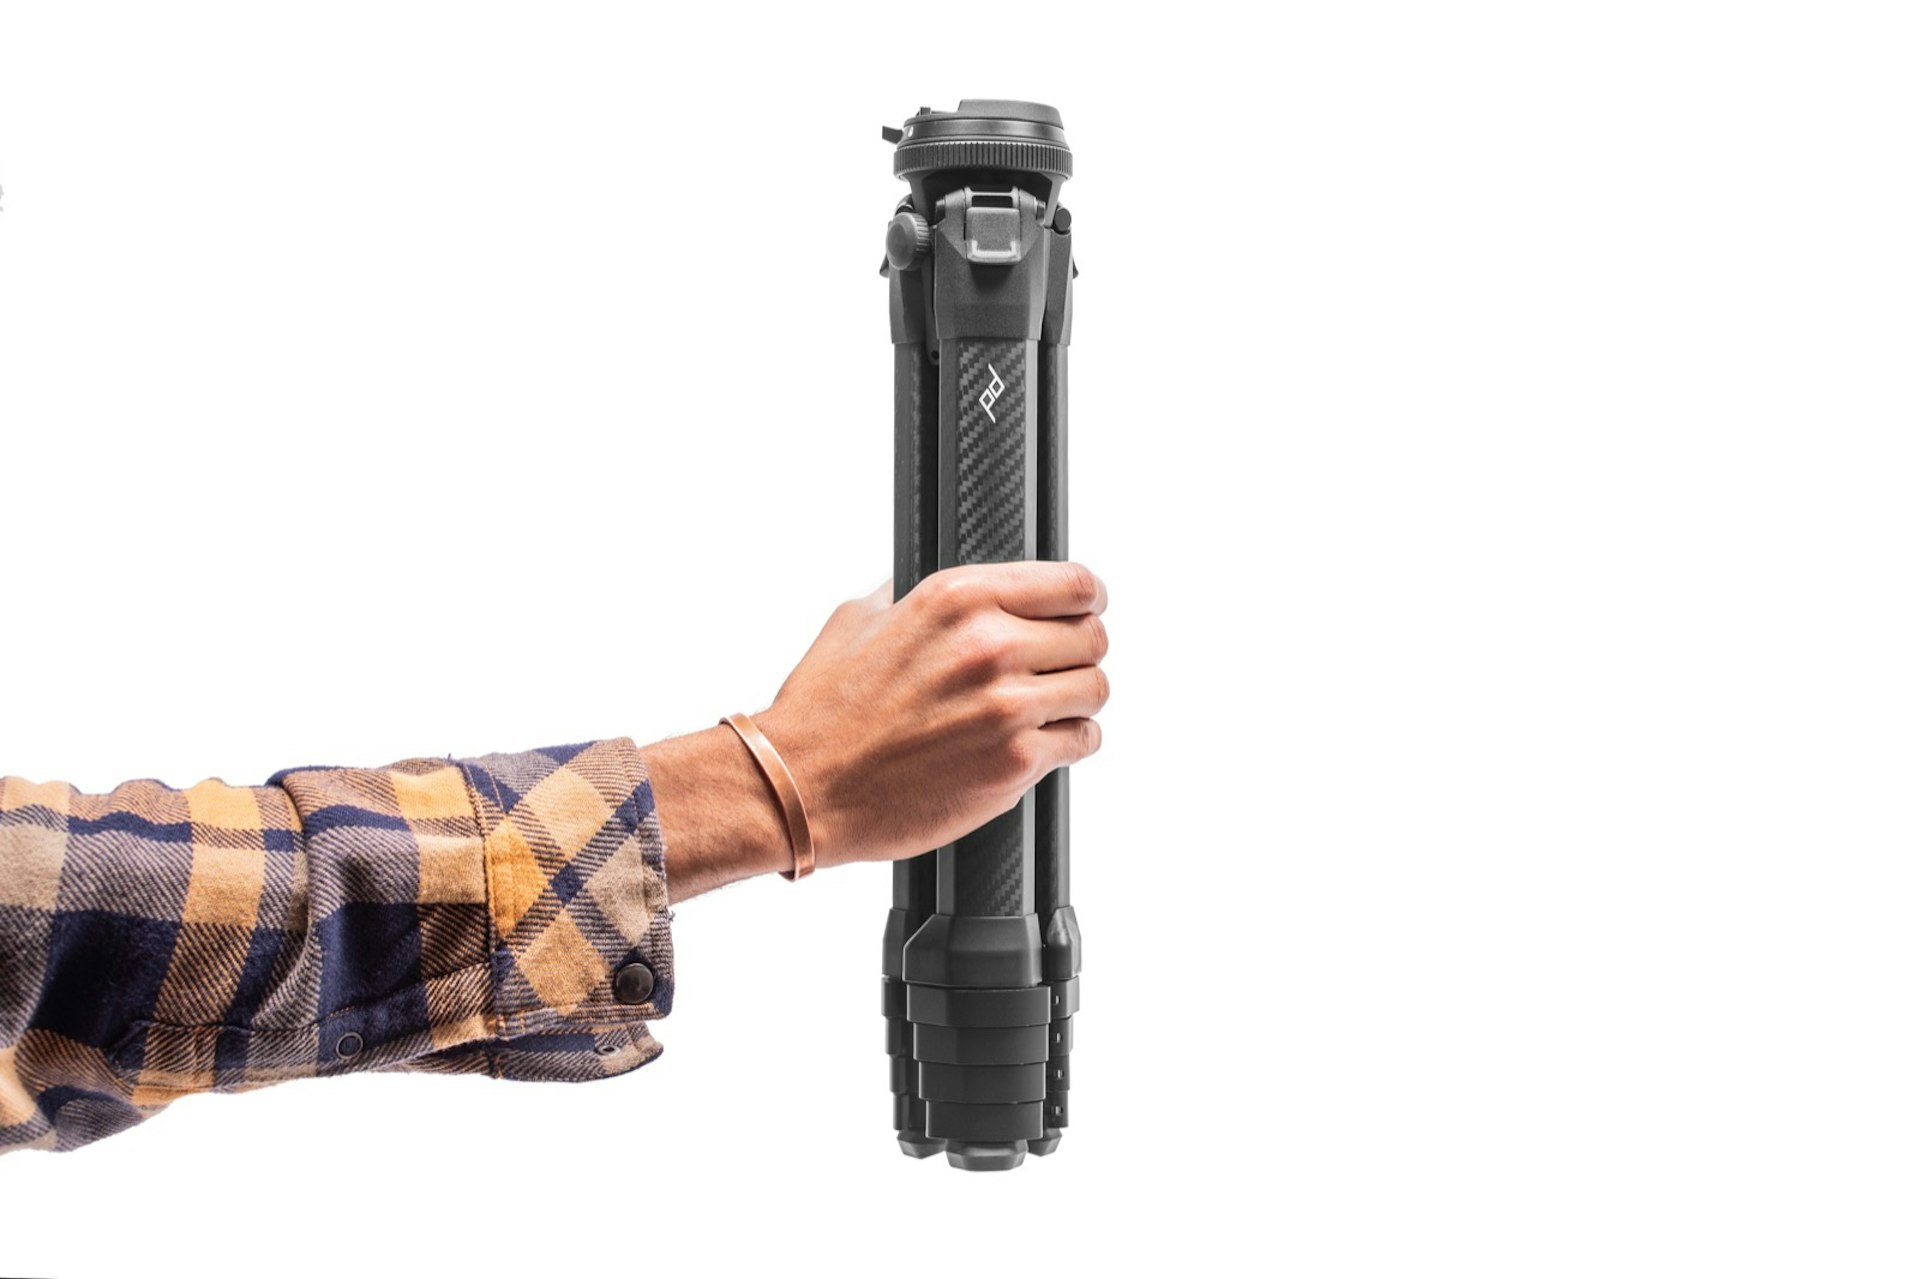 A person holds a compact tripod